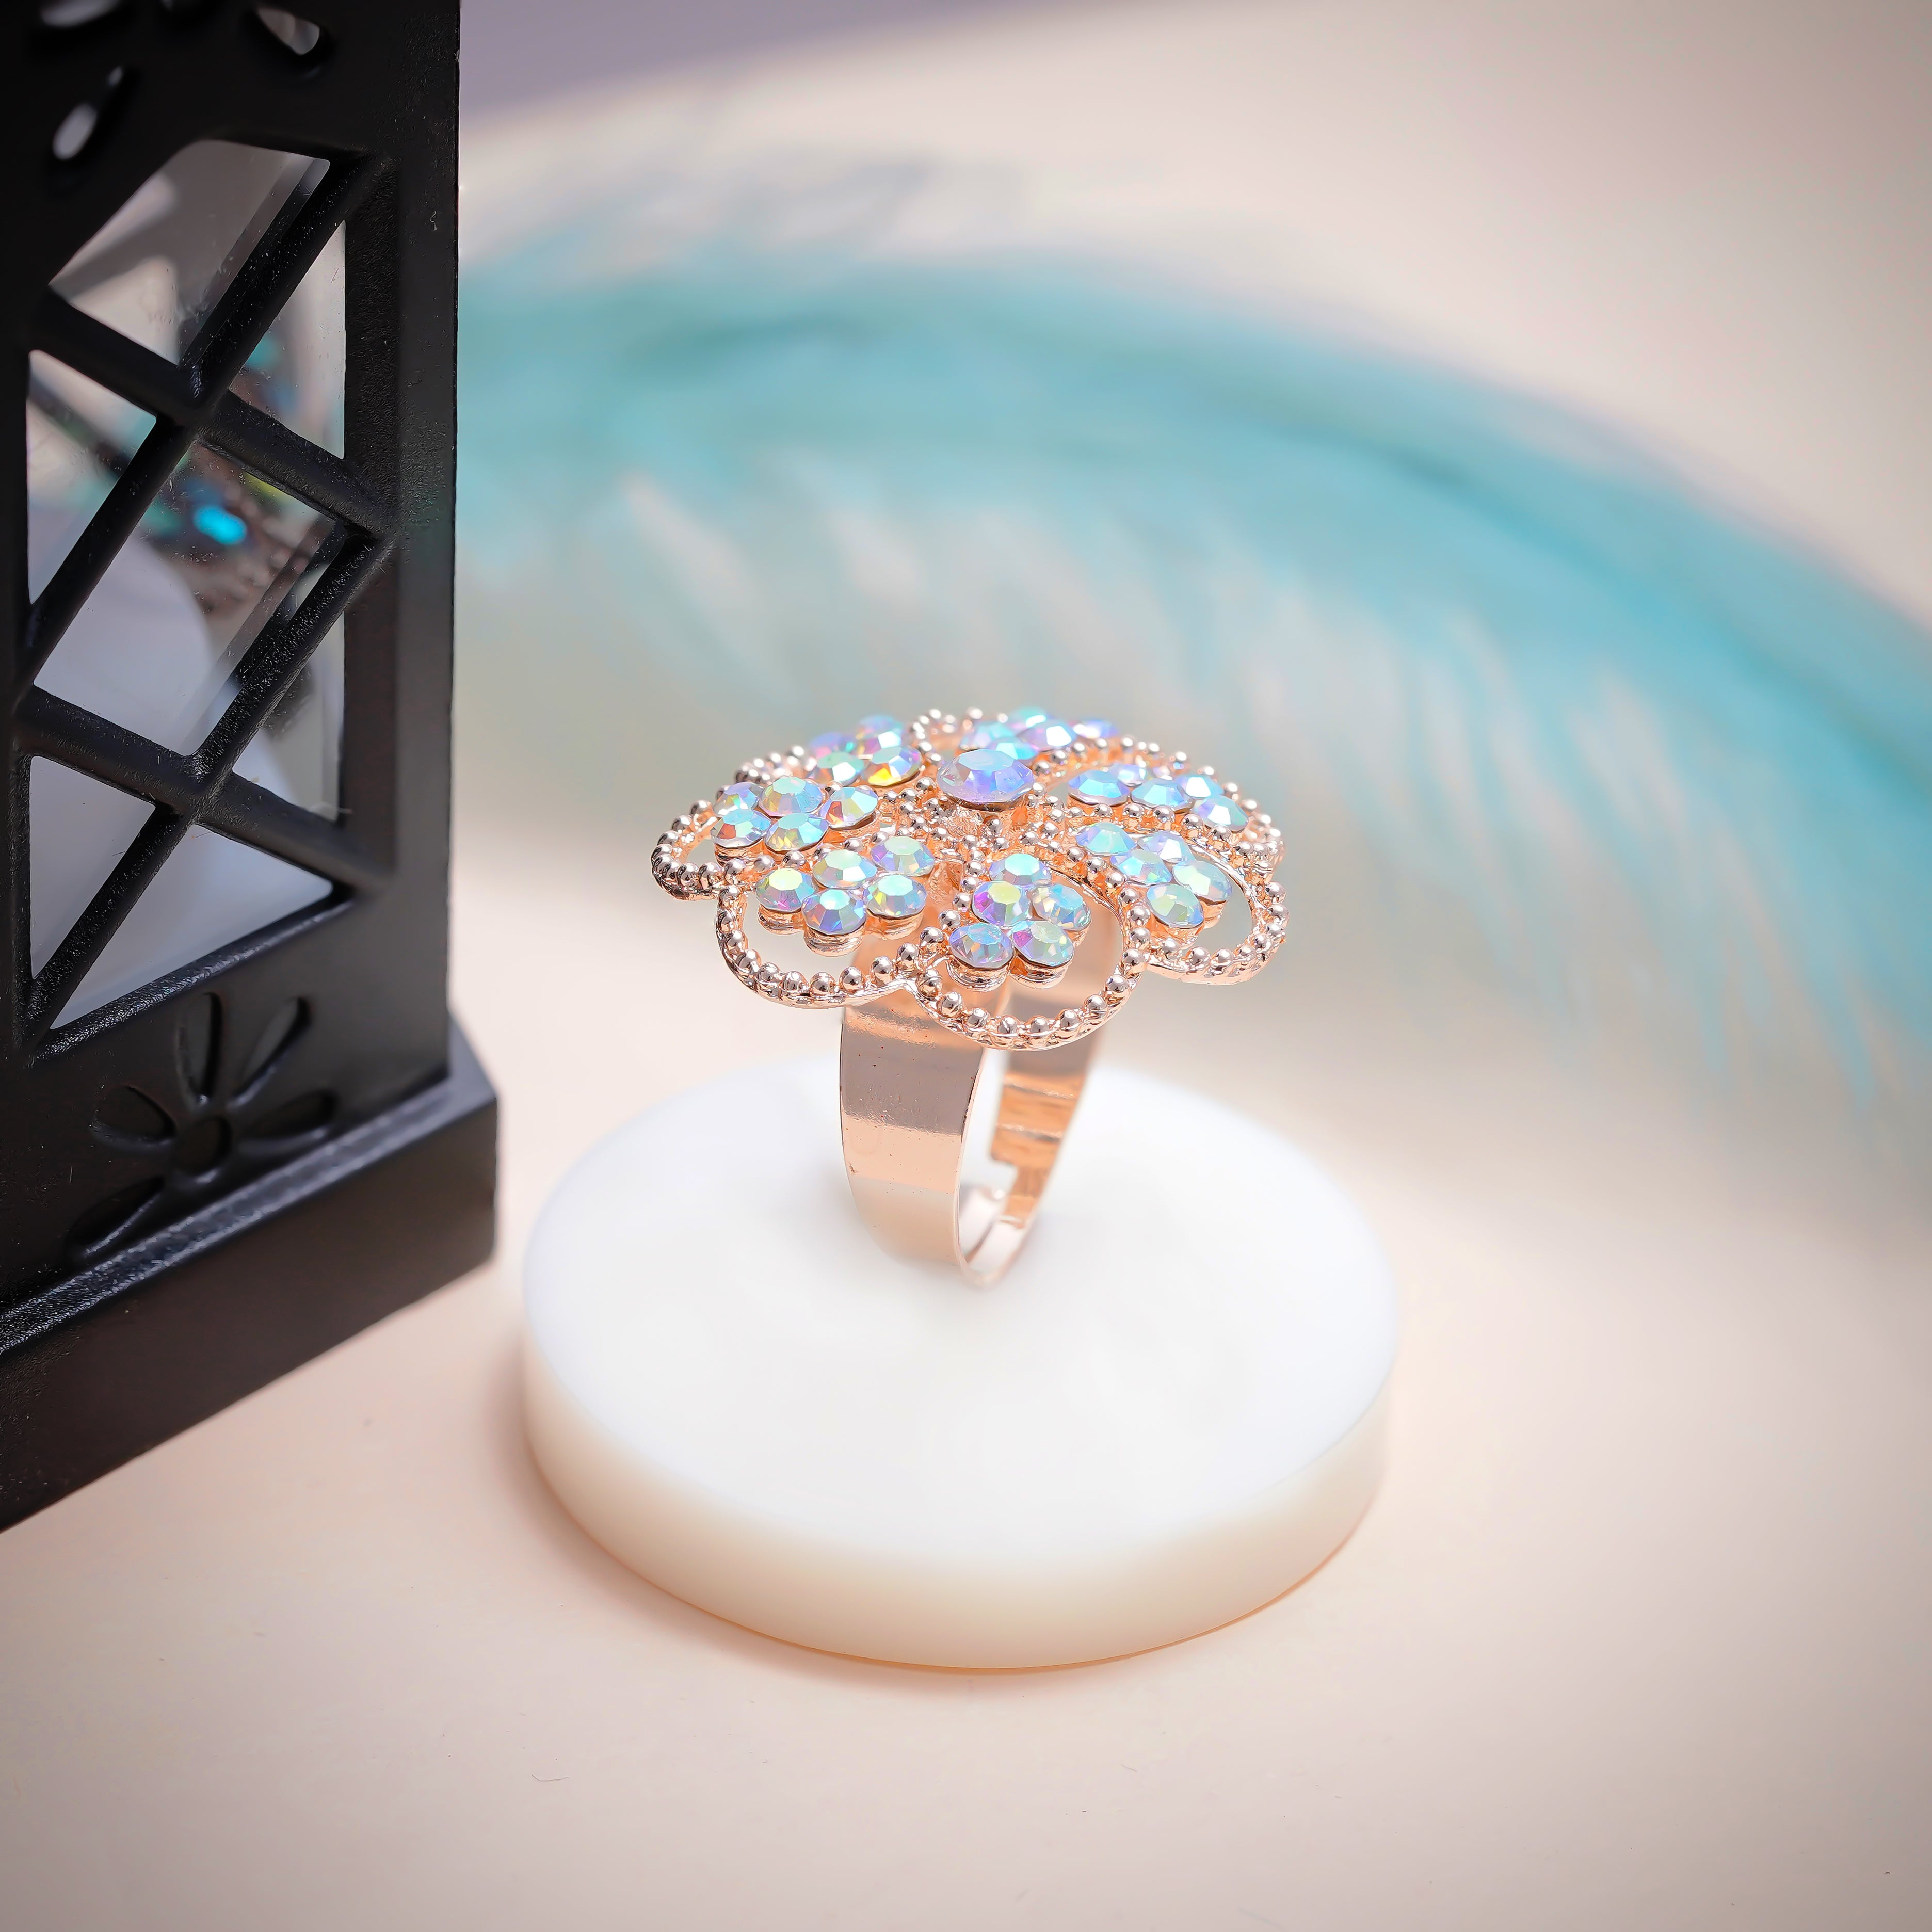 "Jewelsium Grandeur: Command Attention with Your Ring!"